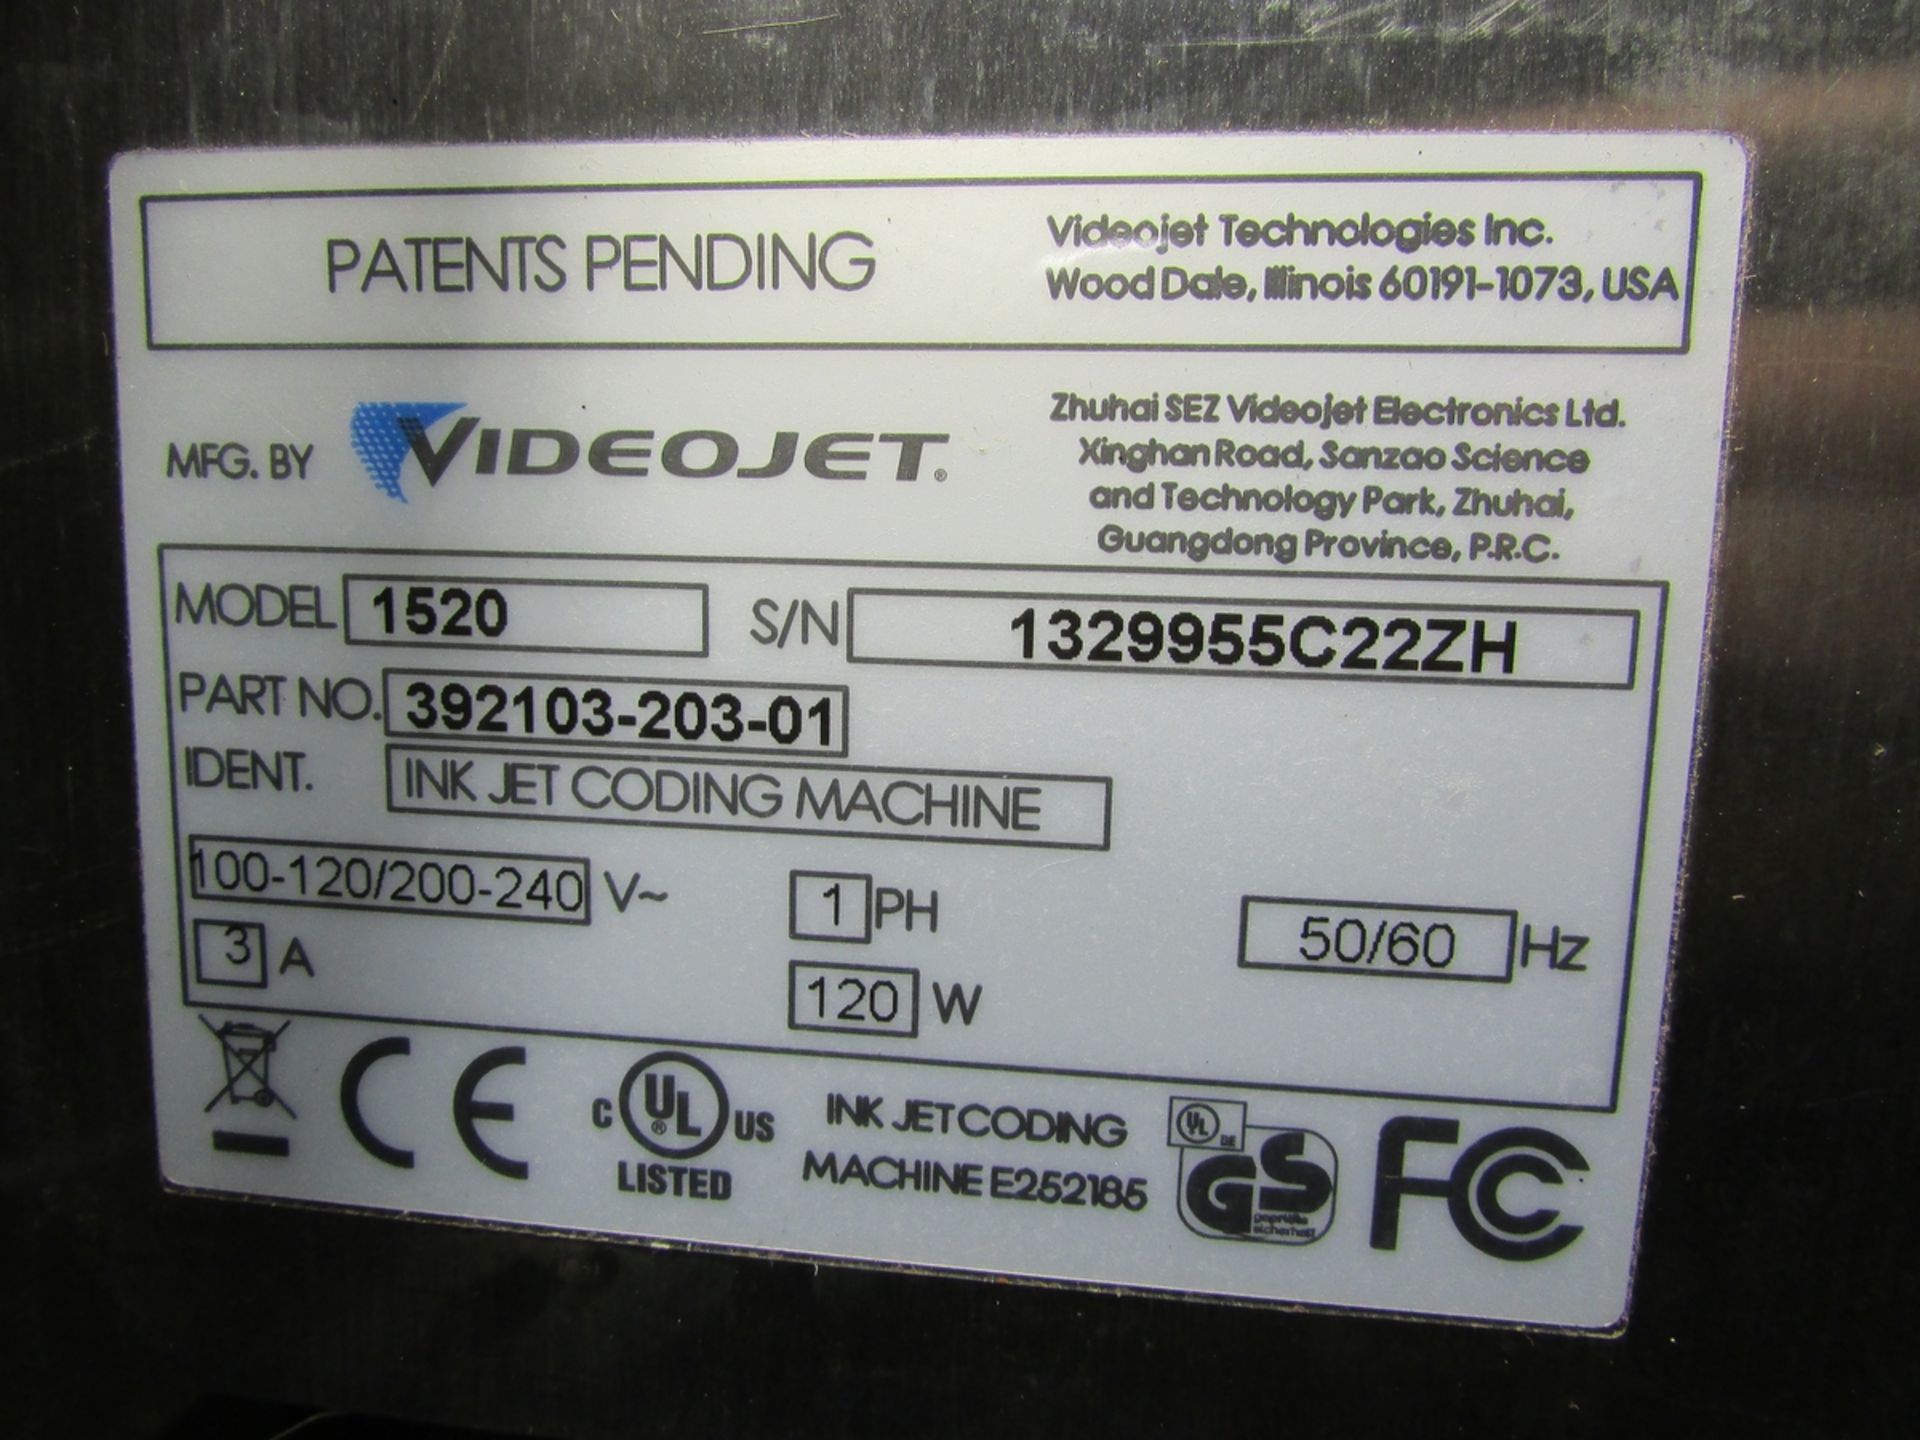 VIDEOJET INK JET CODING MACHINE, MODEL 1520, W/ PRINT HEAD, STEALTH TOUCH MONITOR, AUTOMATION PLUS - Image 10 of 10